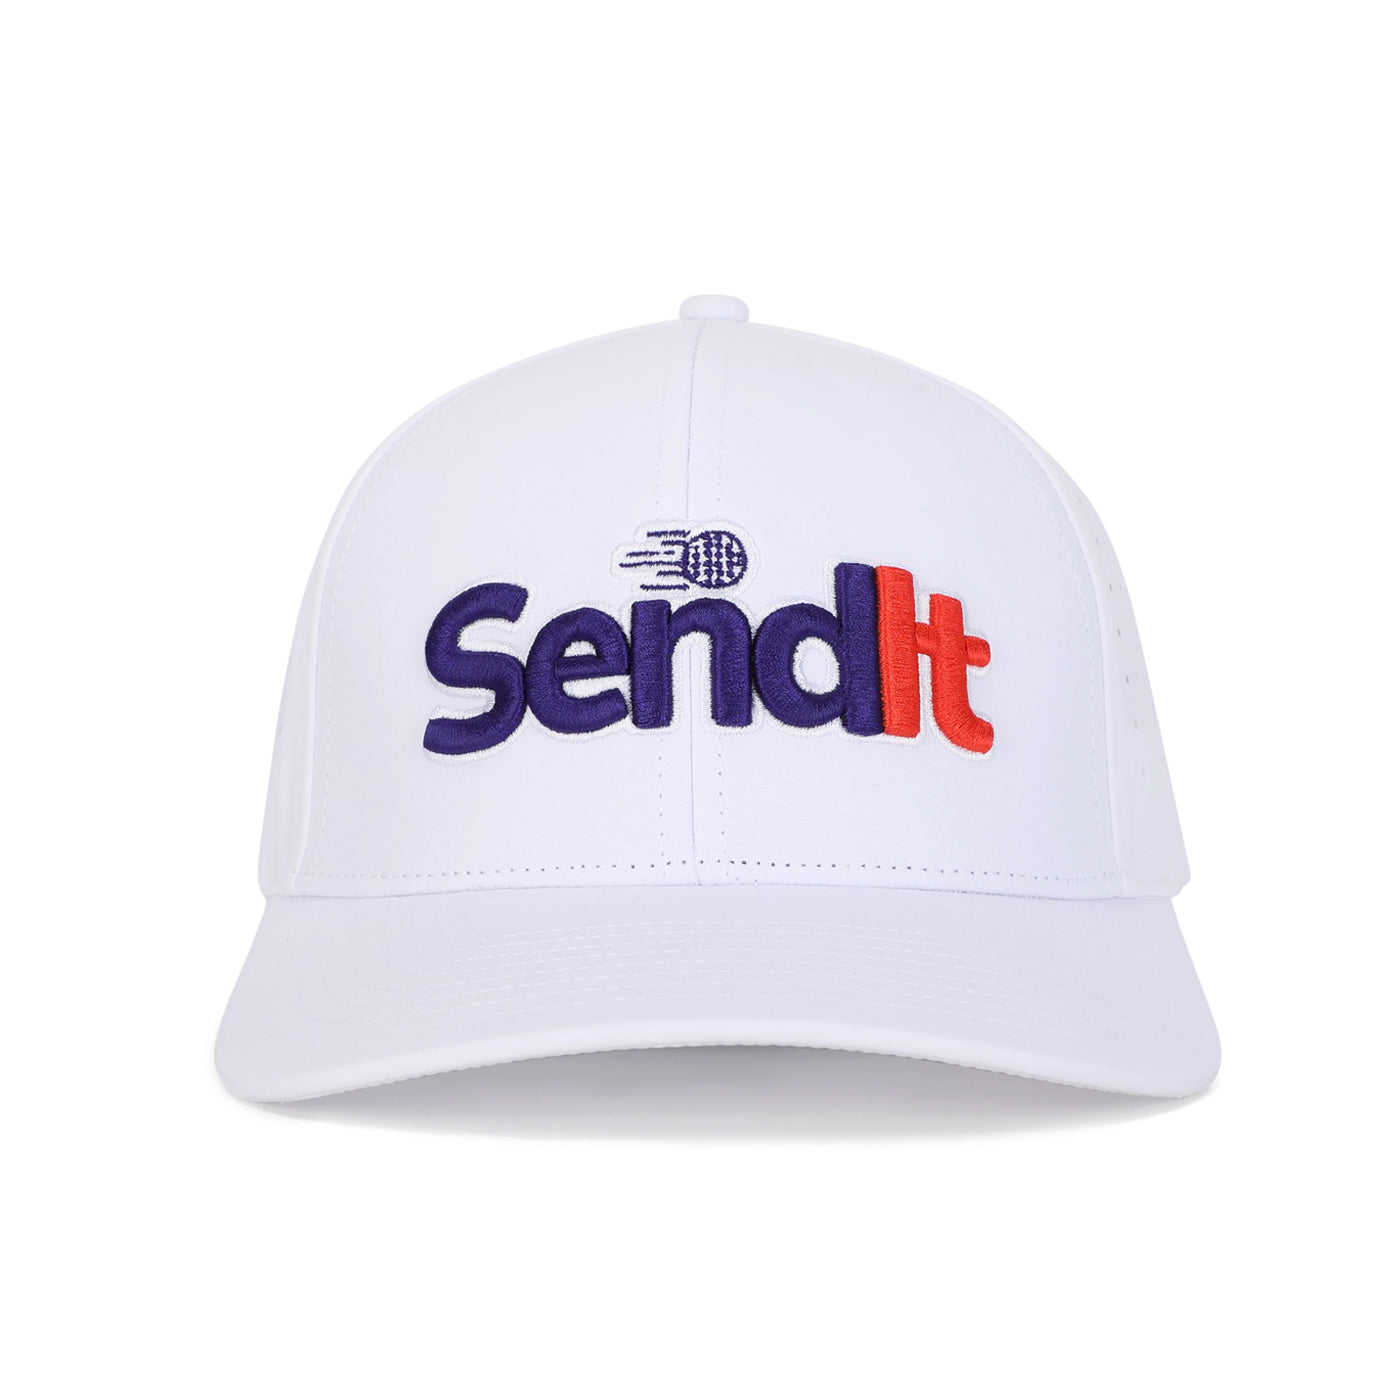 Send It - Performance Golf Hat - Fitted